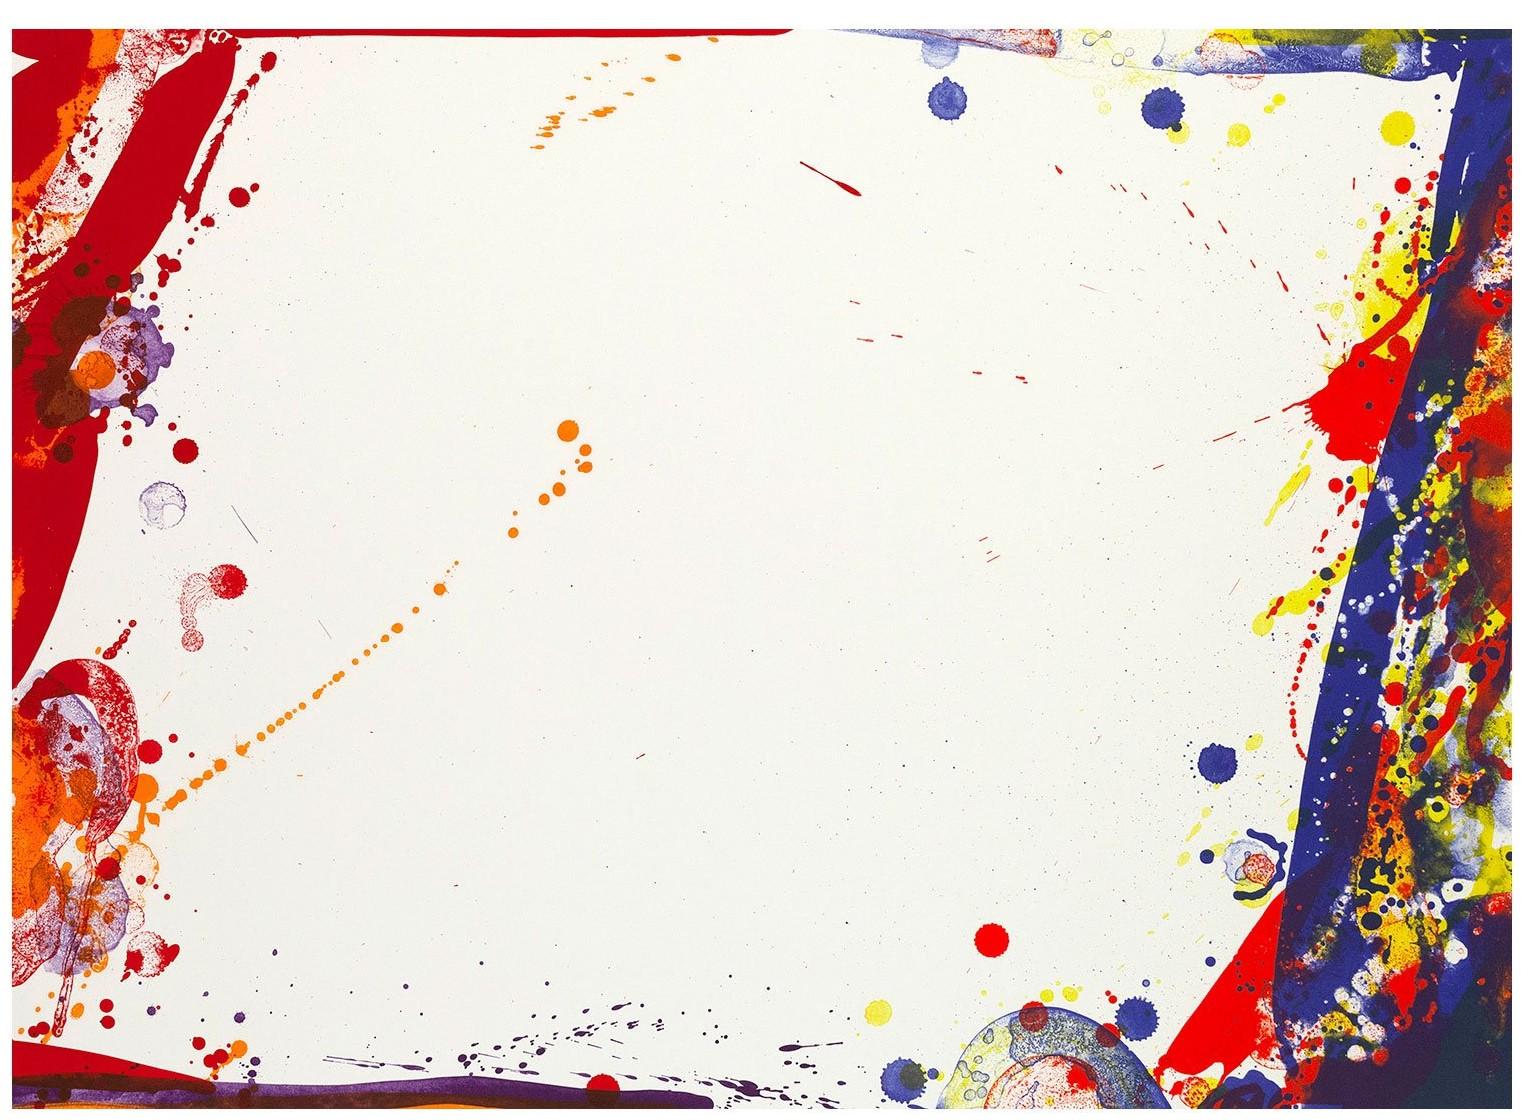 A notably small edition, this original lithograph was created by Sam Francis in 1969 and is hand-signed by the artist in pencil, and numbered (verso), measuring 22 x 30 inches (56 x 76.2 cm), unframed.  From the edition of just 20, the artwork is